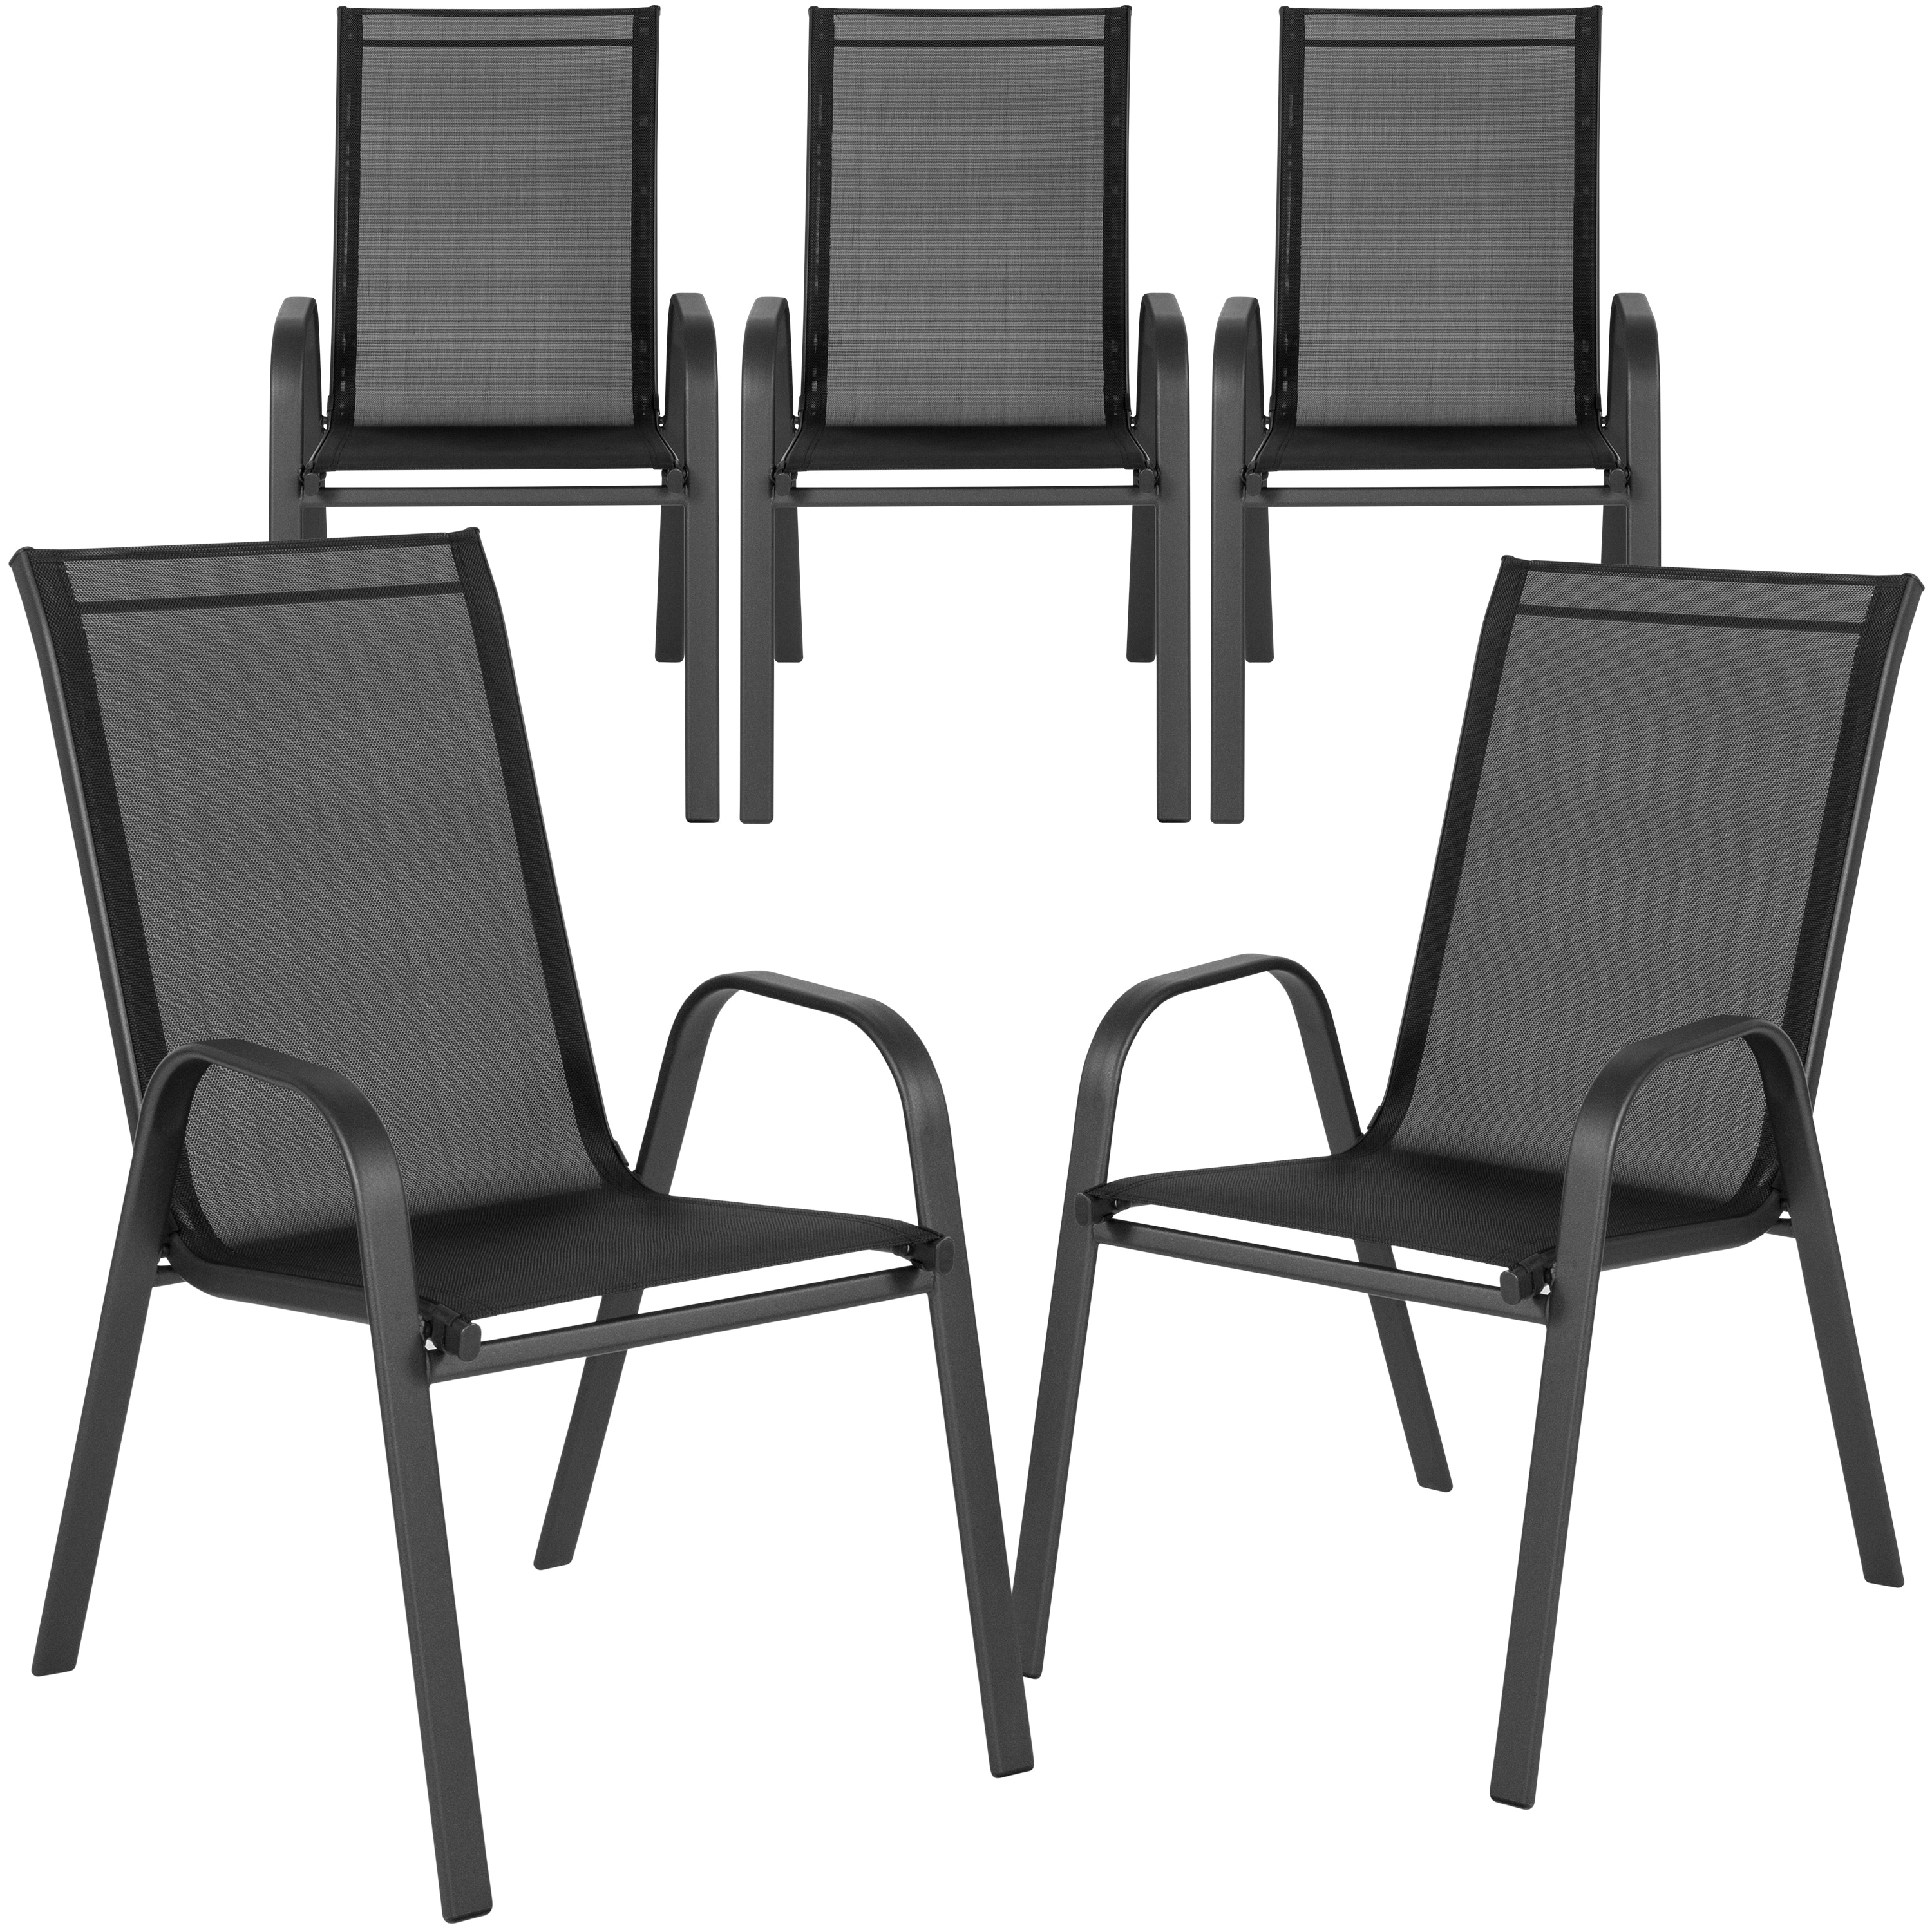 5 Pack Outdoor Stack Chair With Flex Comfort Material Patio Stack Chair 2125w X 29d X 36h On Sale Overstock 26385948